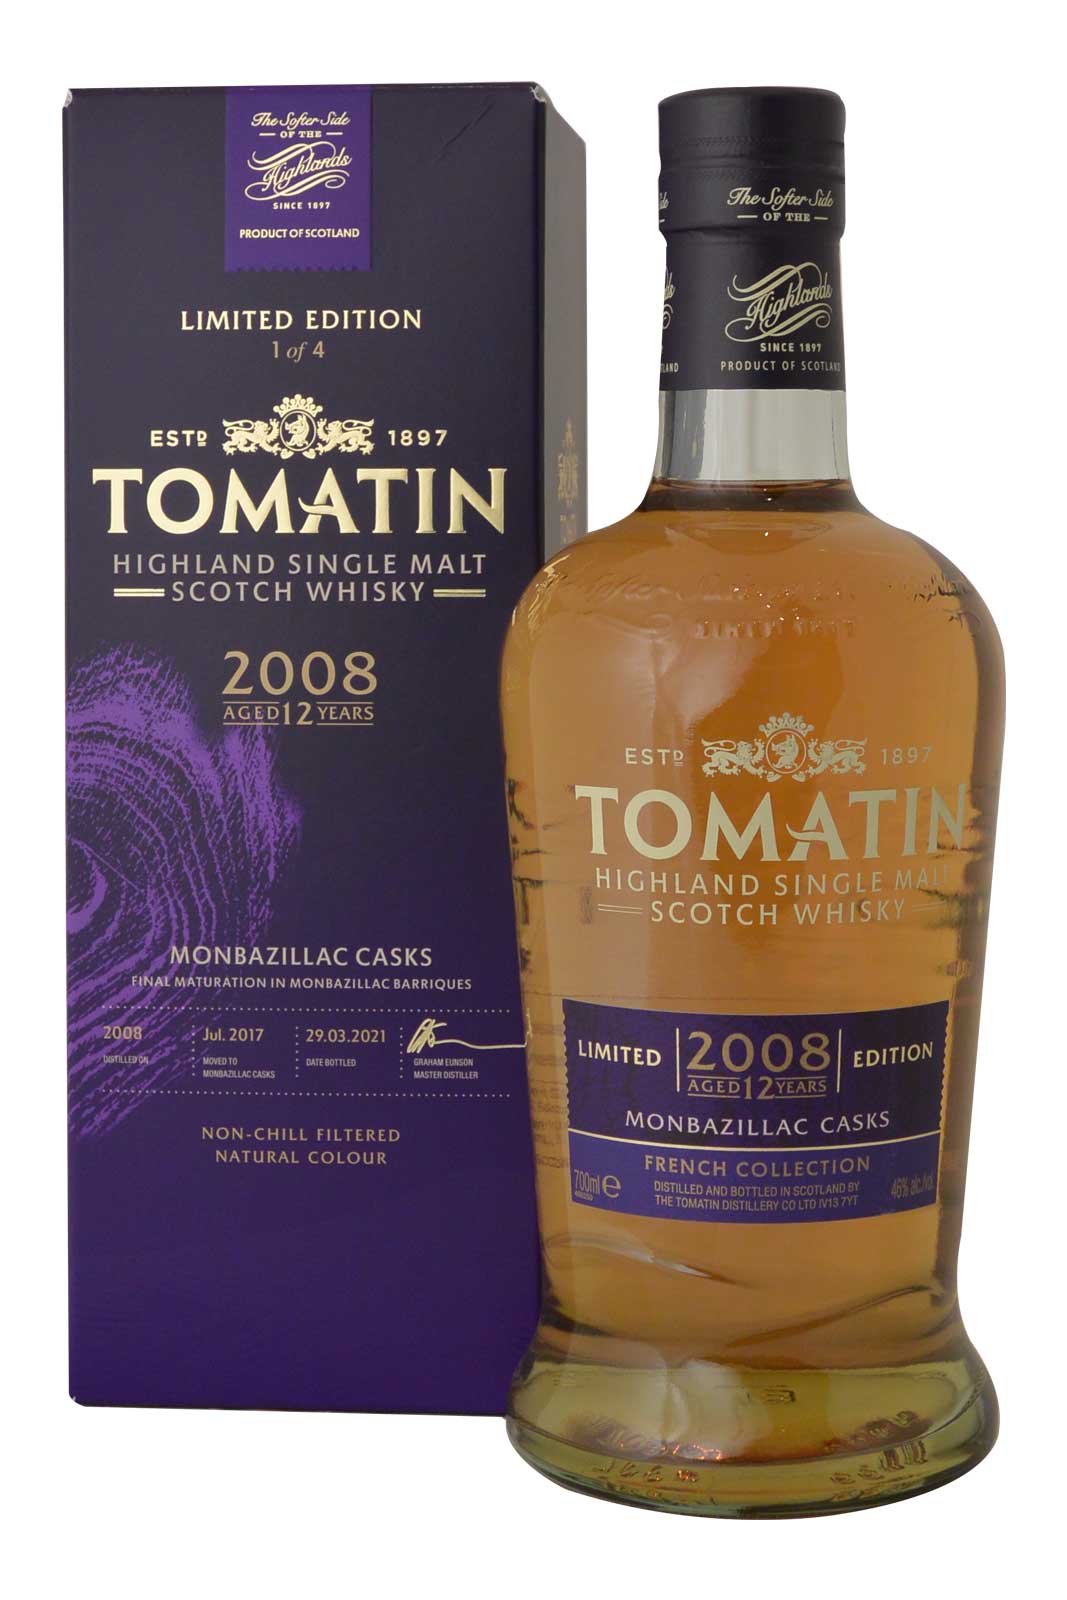 Tomatin 12 Year Old 2008 Monbazillac -  French Collection